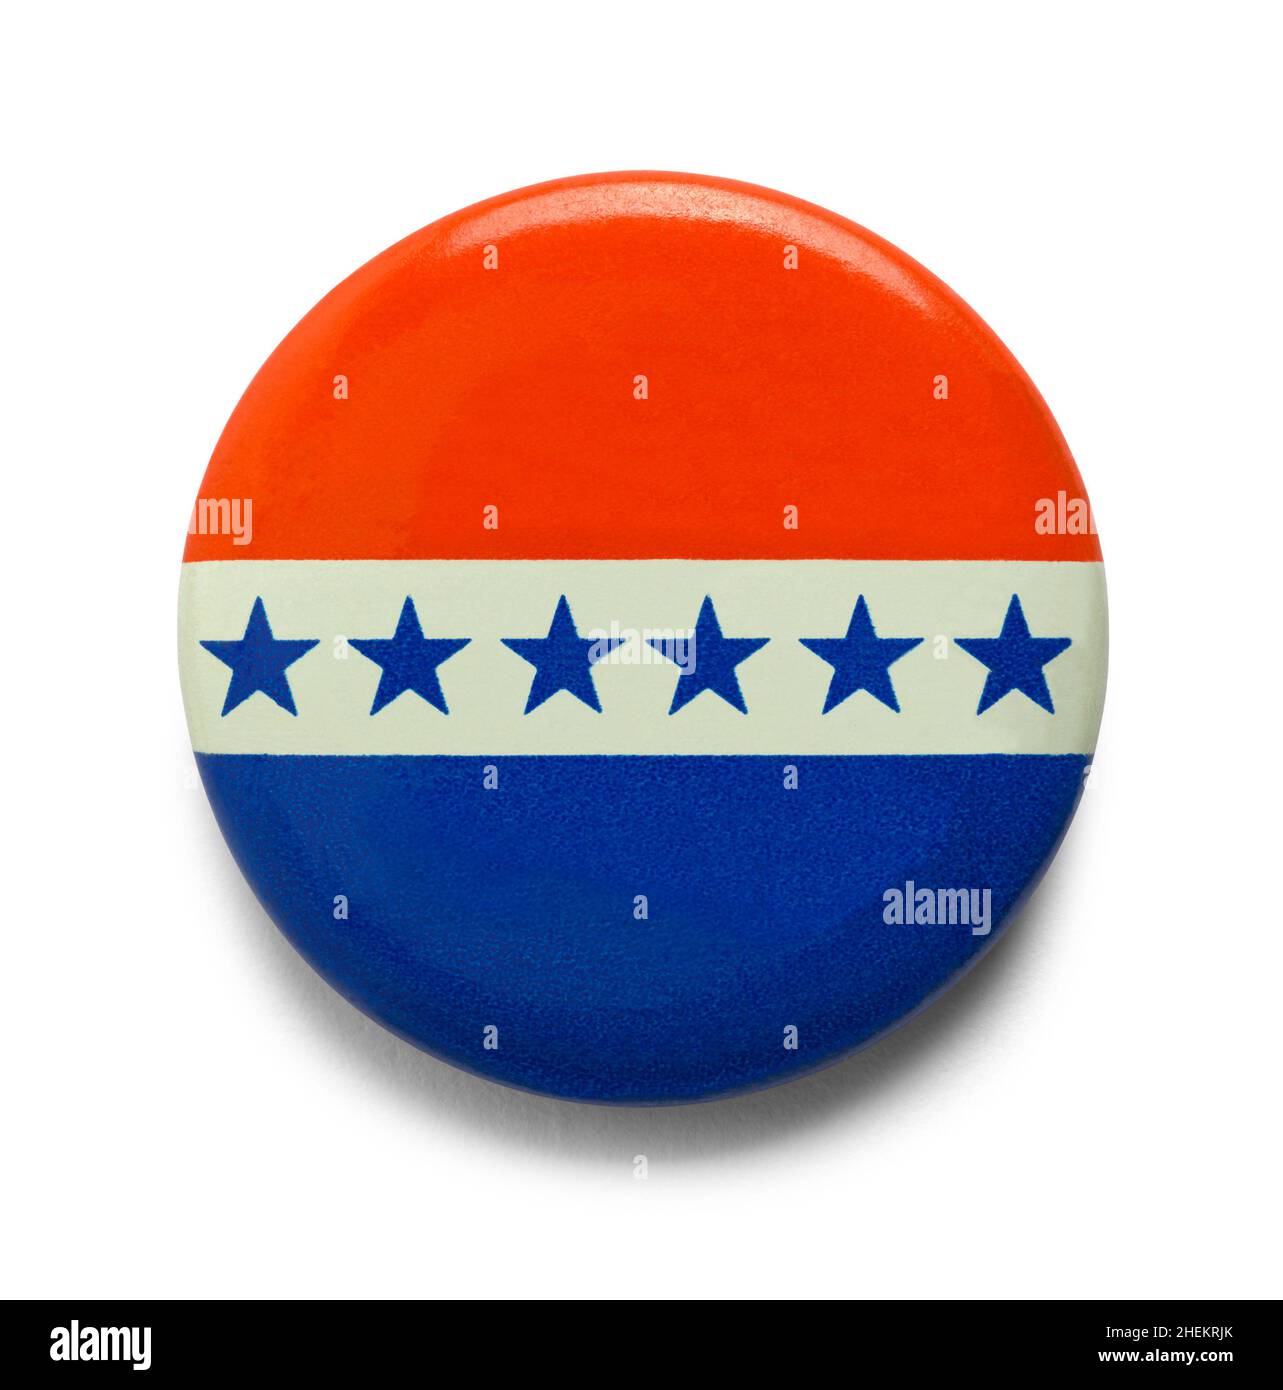 Vintage Campaign Election Button Cut Out on White. Stock Photo